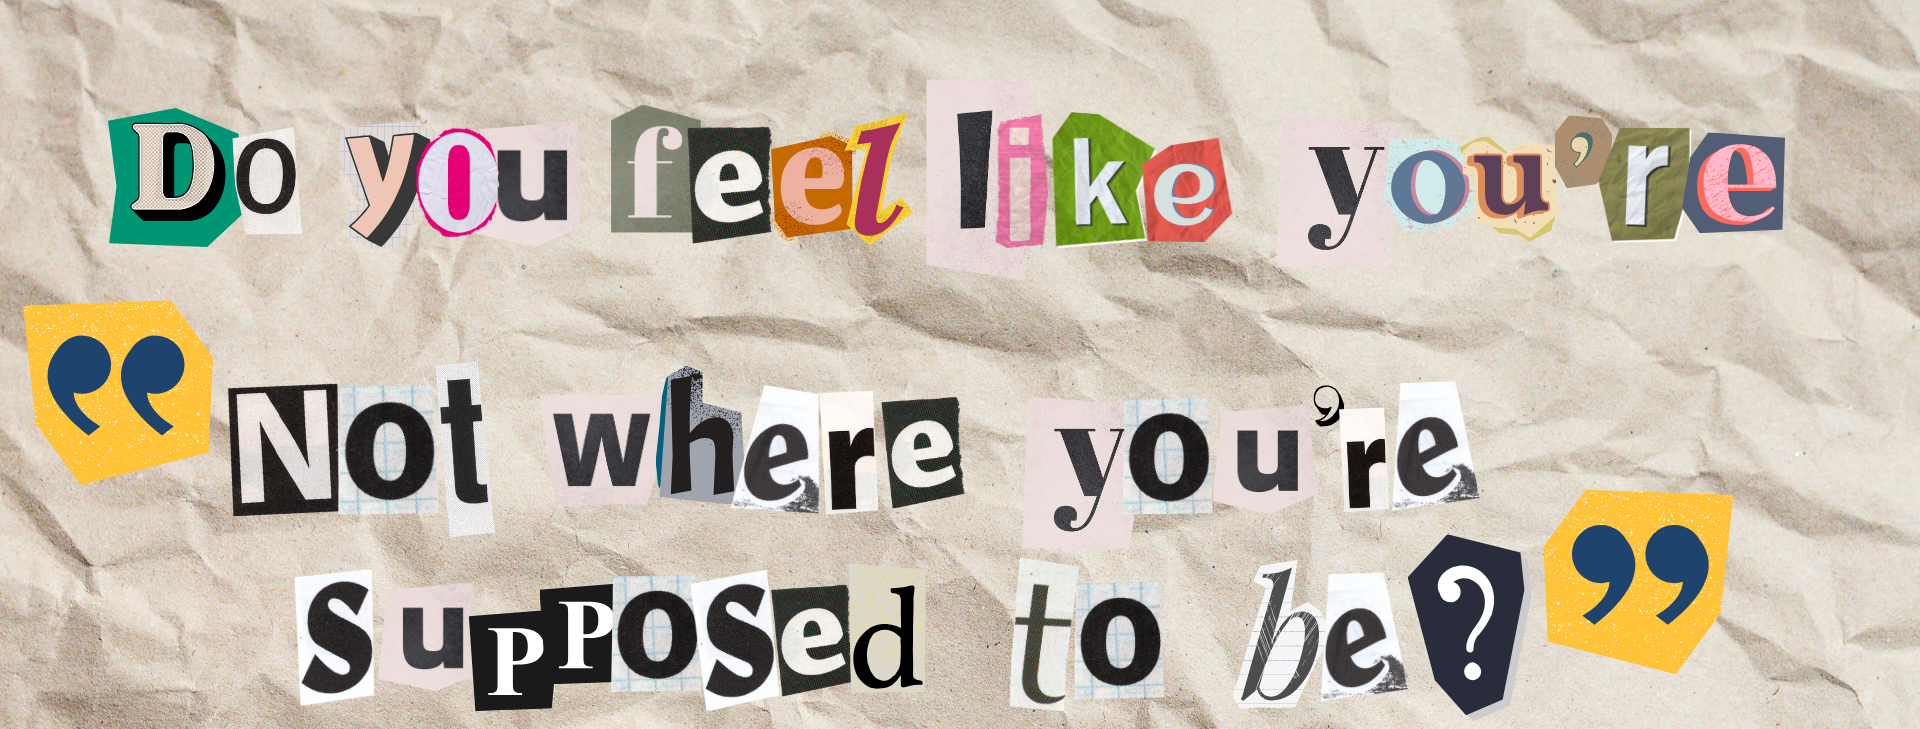 The image shows crumpled paper with cutout letters stating, &quot;Do you feel like you&#x27;re not where you&#x27;re supposed to be?&quot;